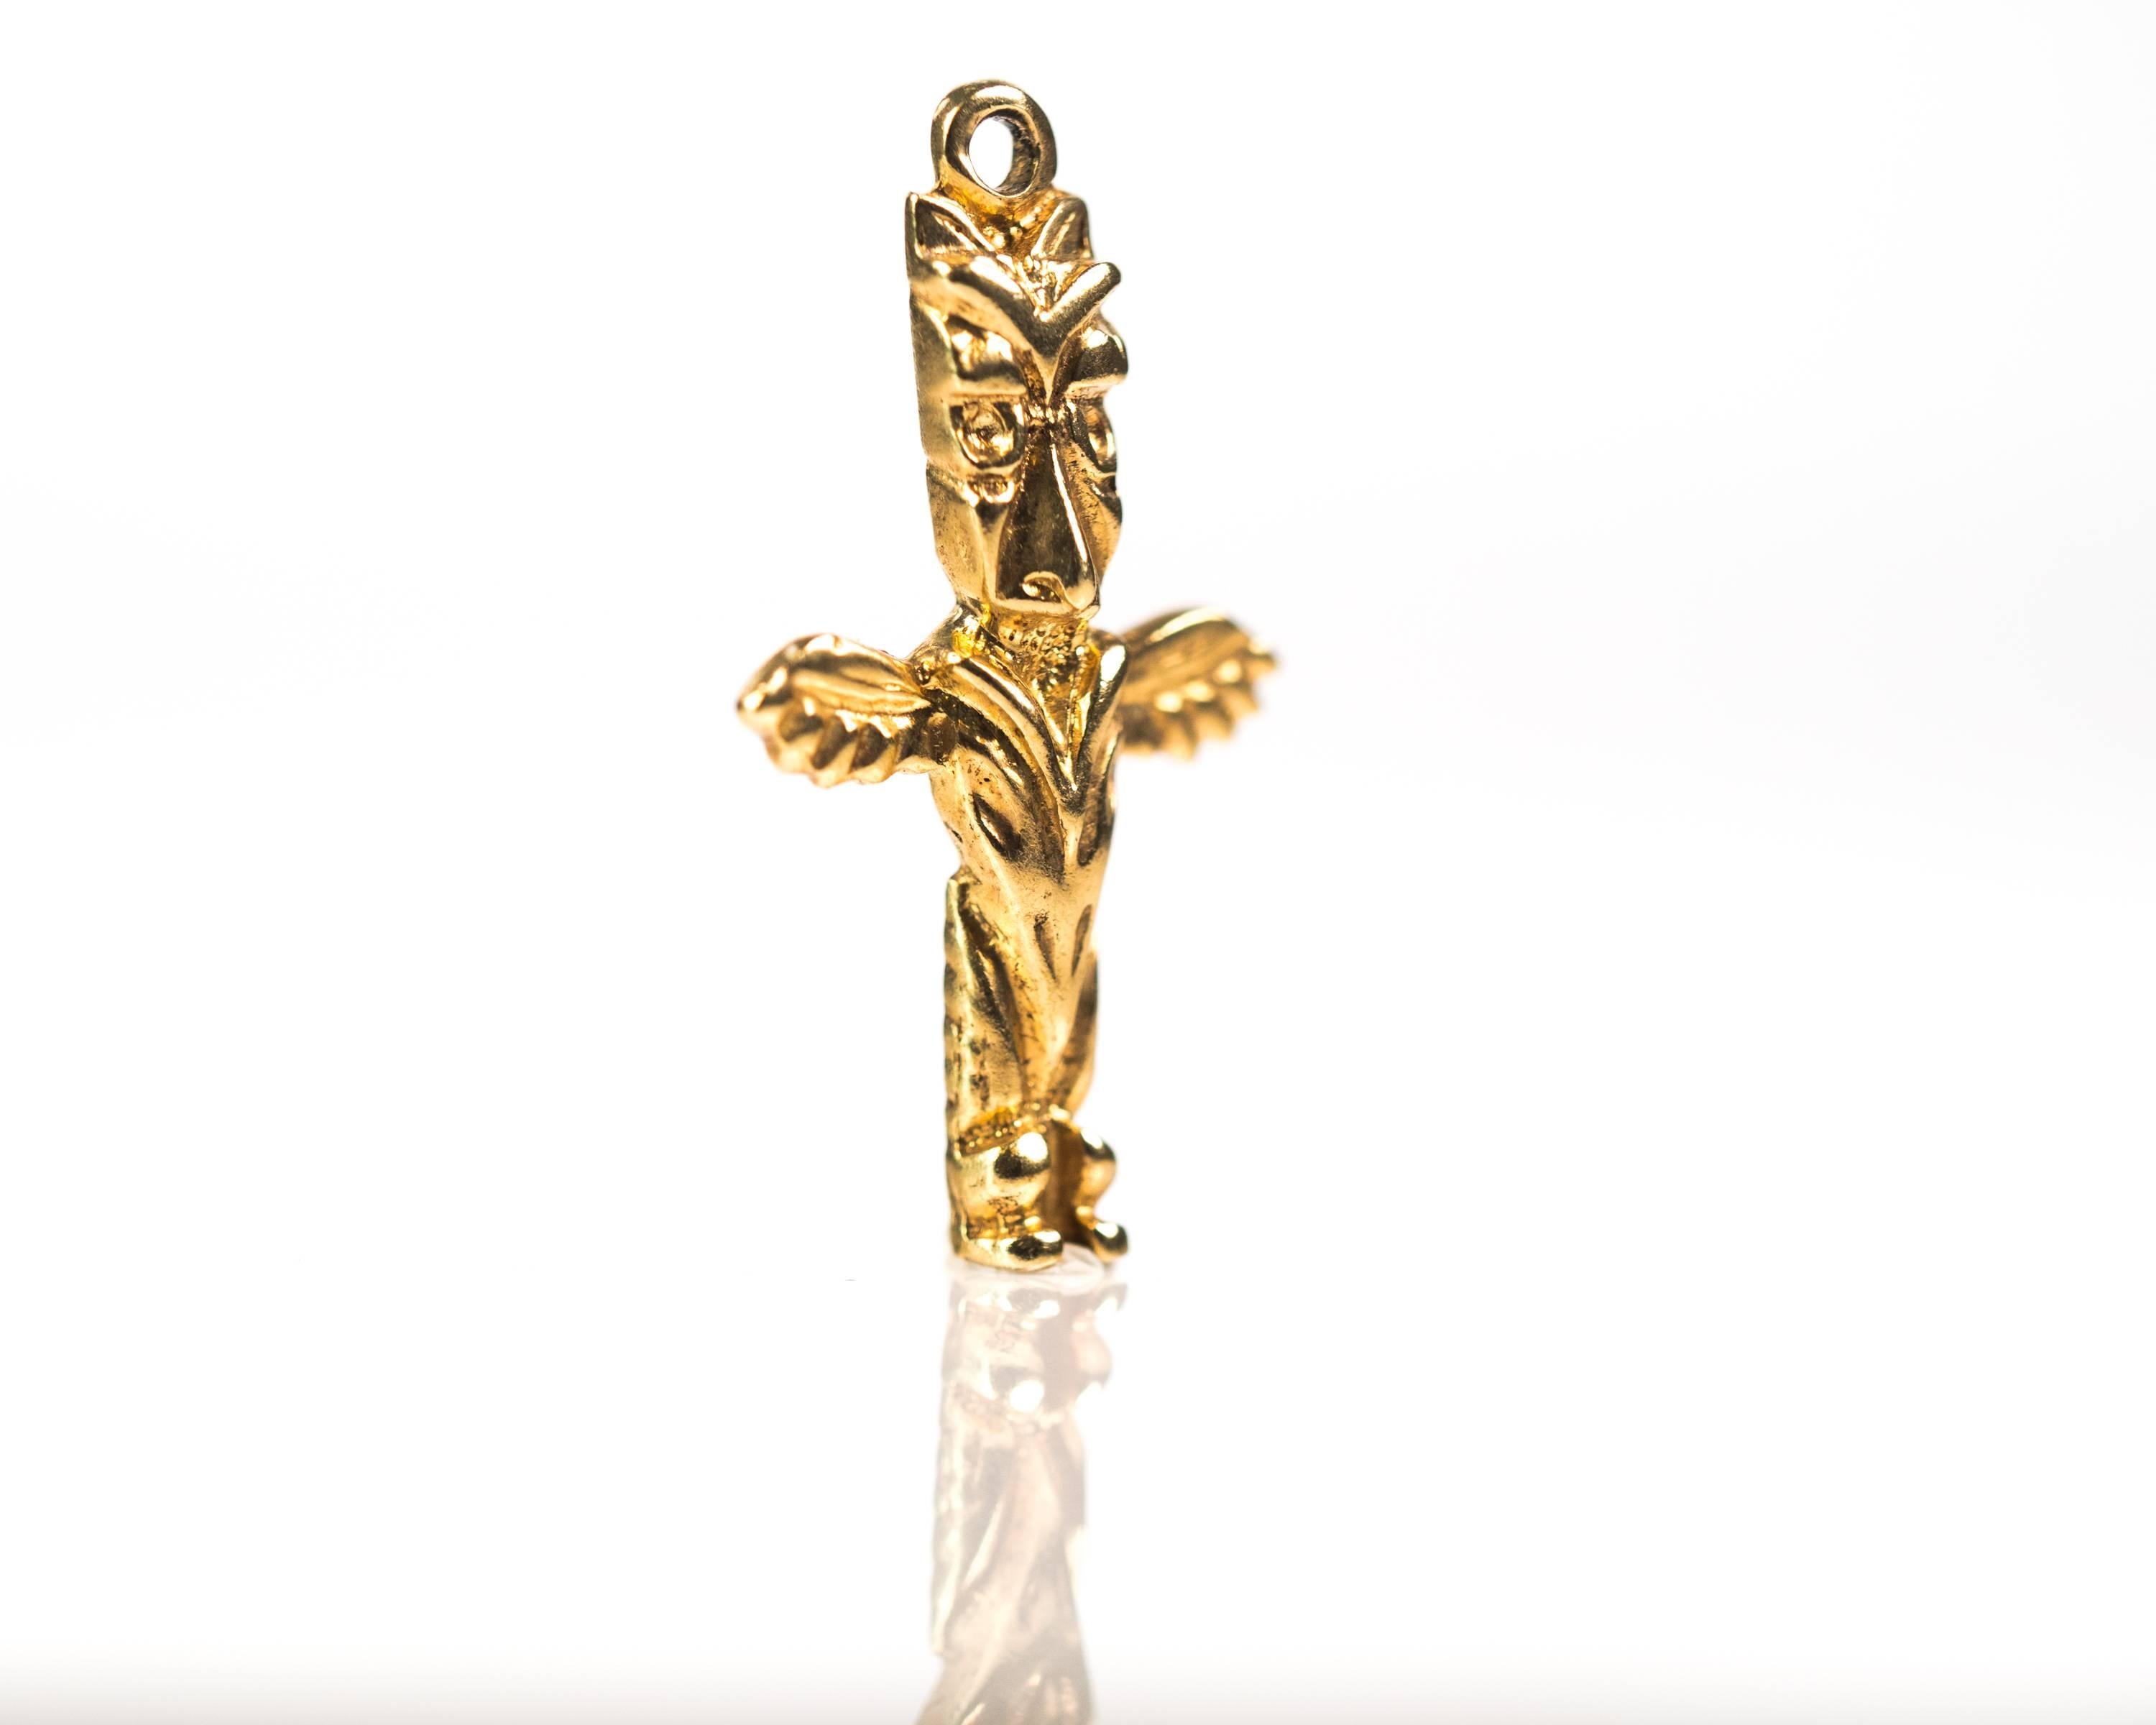 Thunderbird Totem Charm - 10 Karat Yellow Gold

This Gold charm is exquisitely detailed. The head has 2 eyes, a beak with 2 nostril indentations and geometric patterns above the eyes. Two peaked shapes sit at the top of the head on either side like